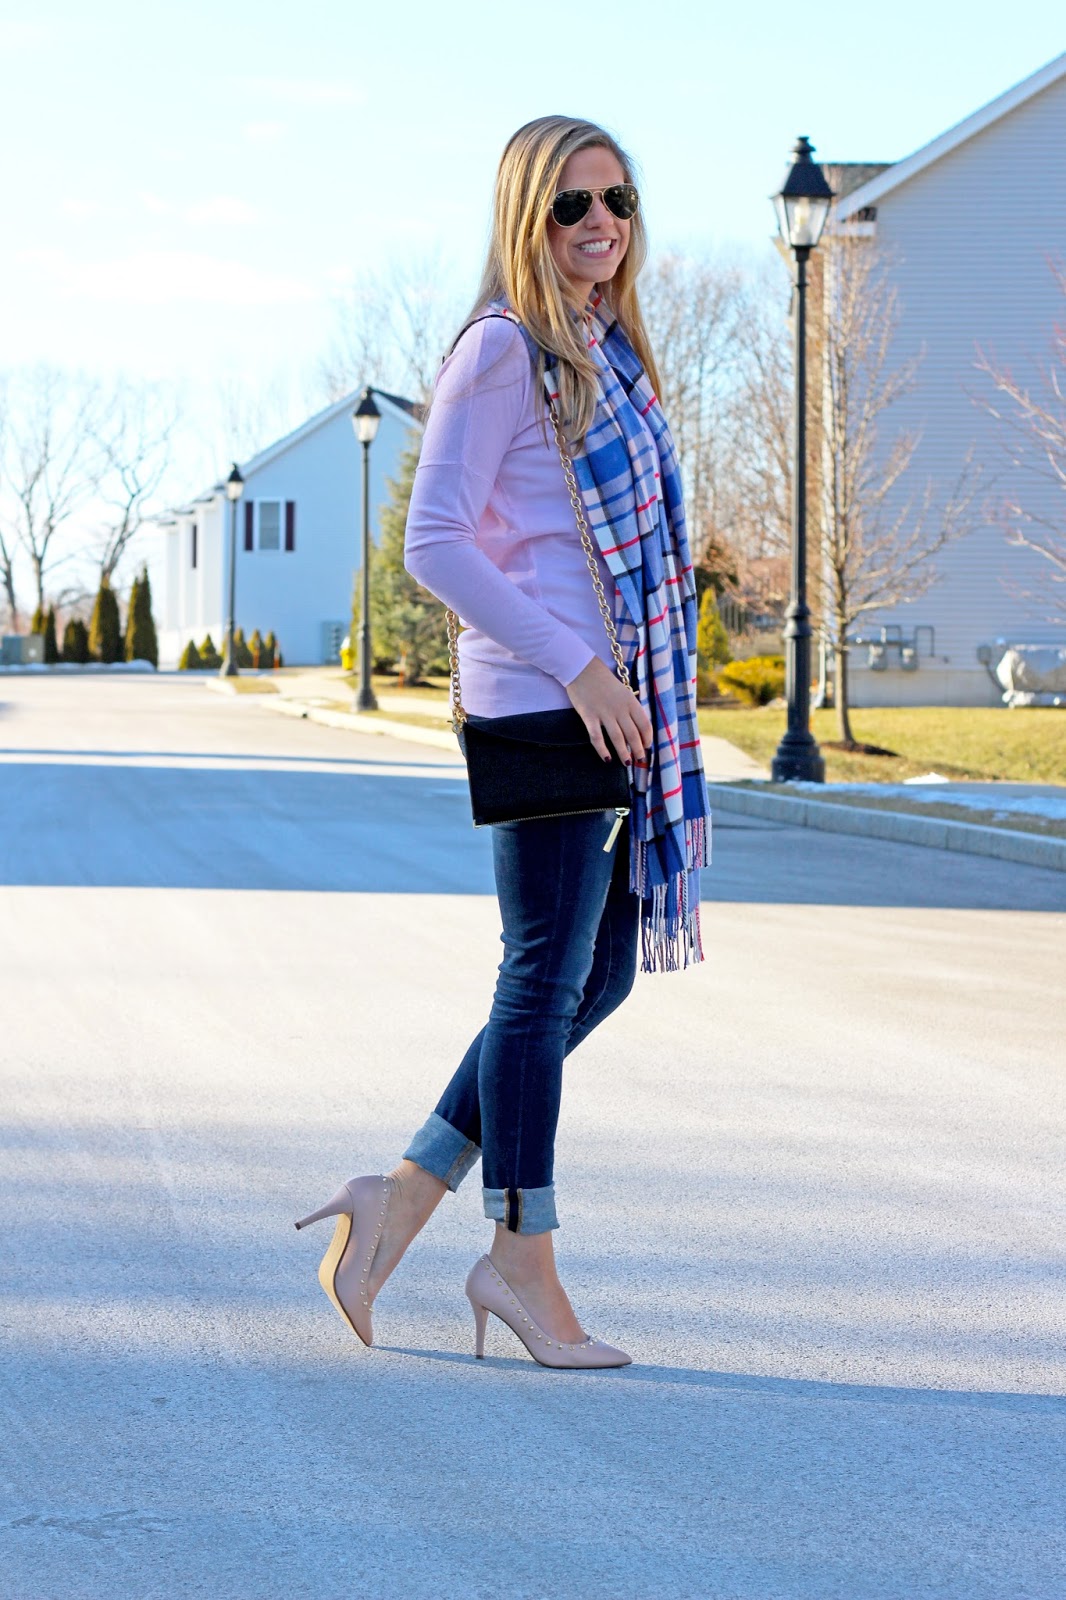 Style Cubby - Fashion and Lifestyle Blog Based in New England: Blushing